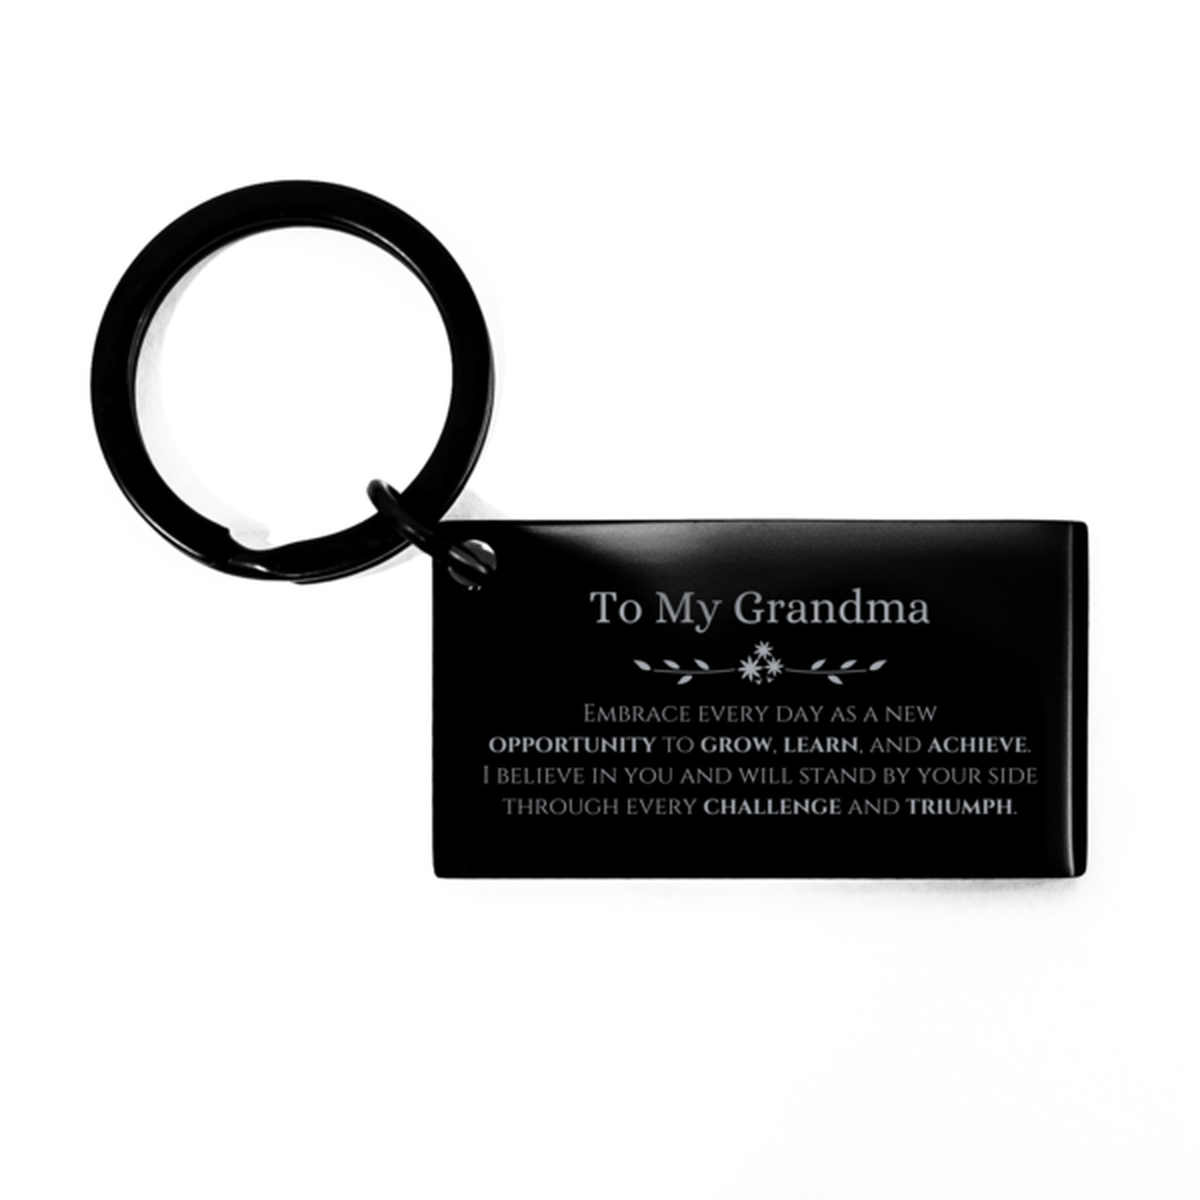 To My Grandma Gifts, I believe in you and will stand by your side, Inspirational Keychain For Grandma, Birthday Christmas Motivational Grandma Gifts